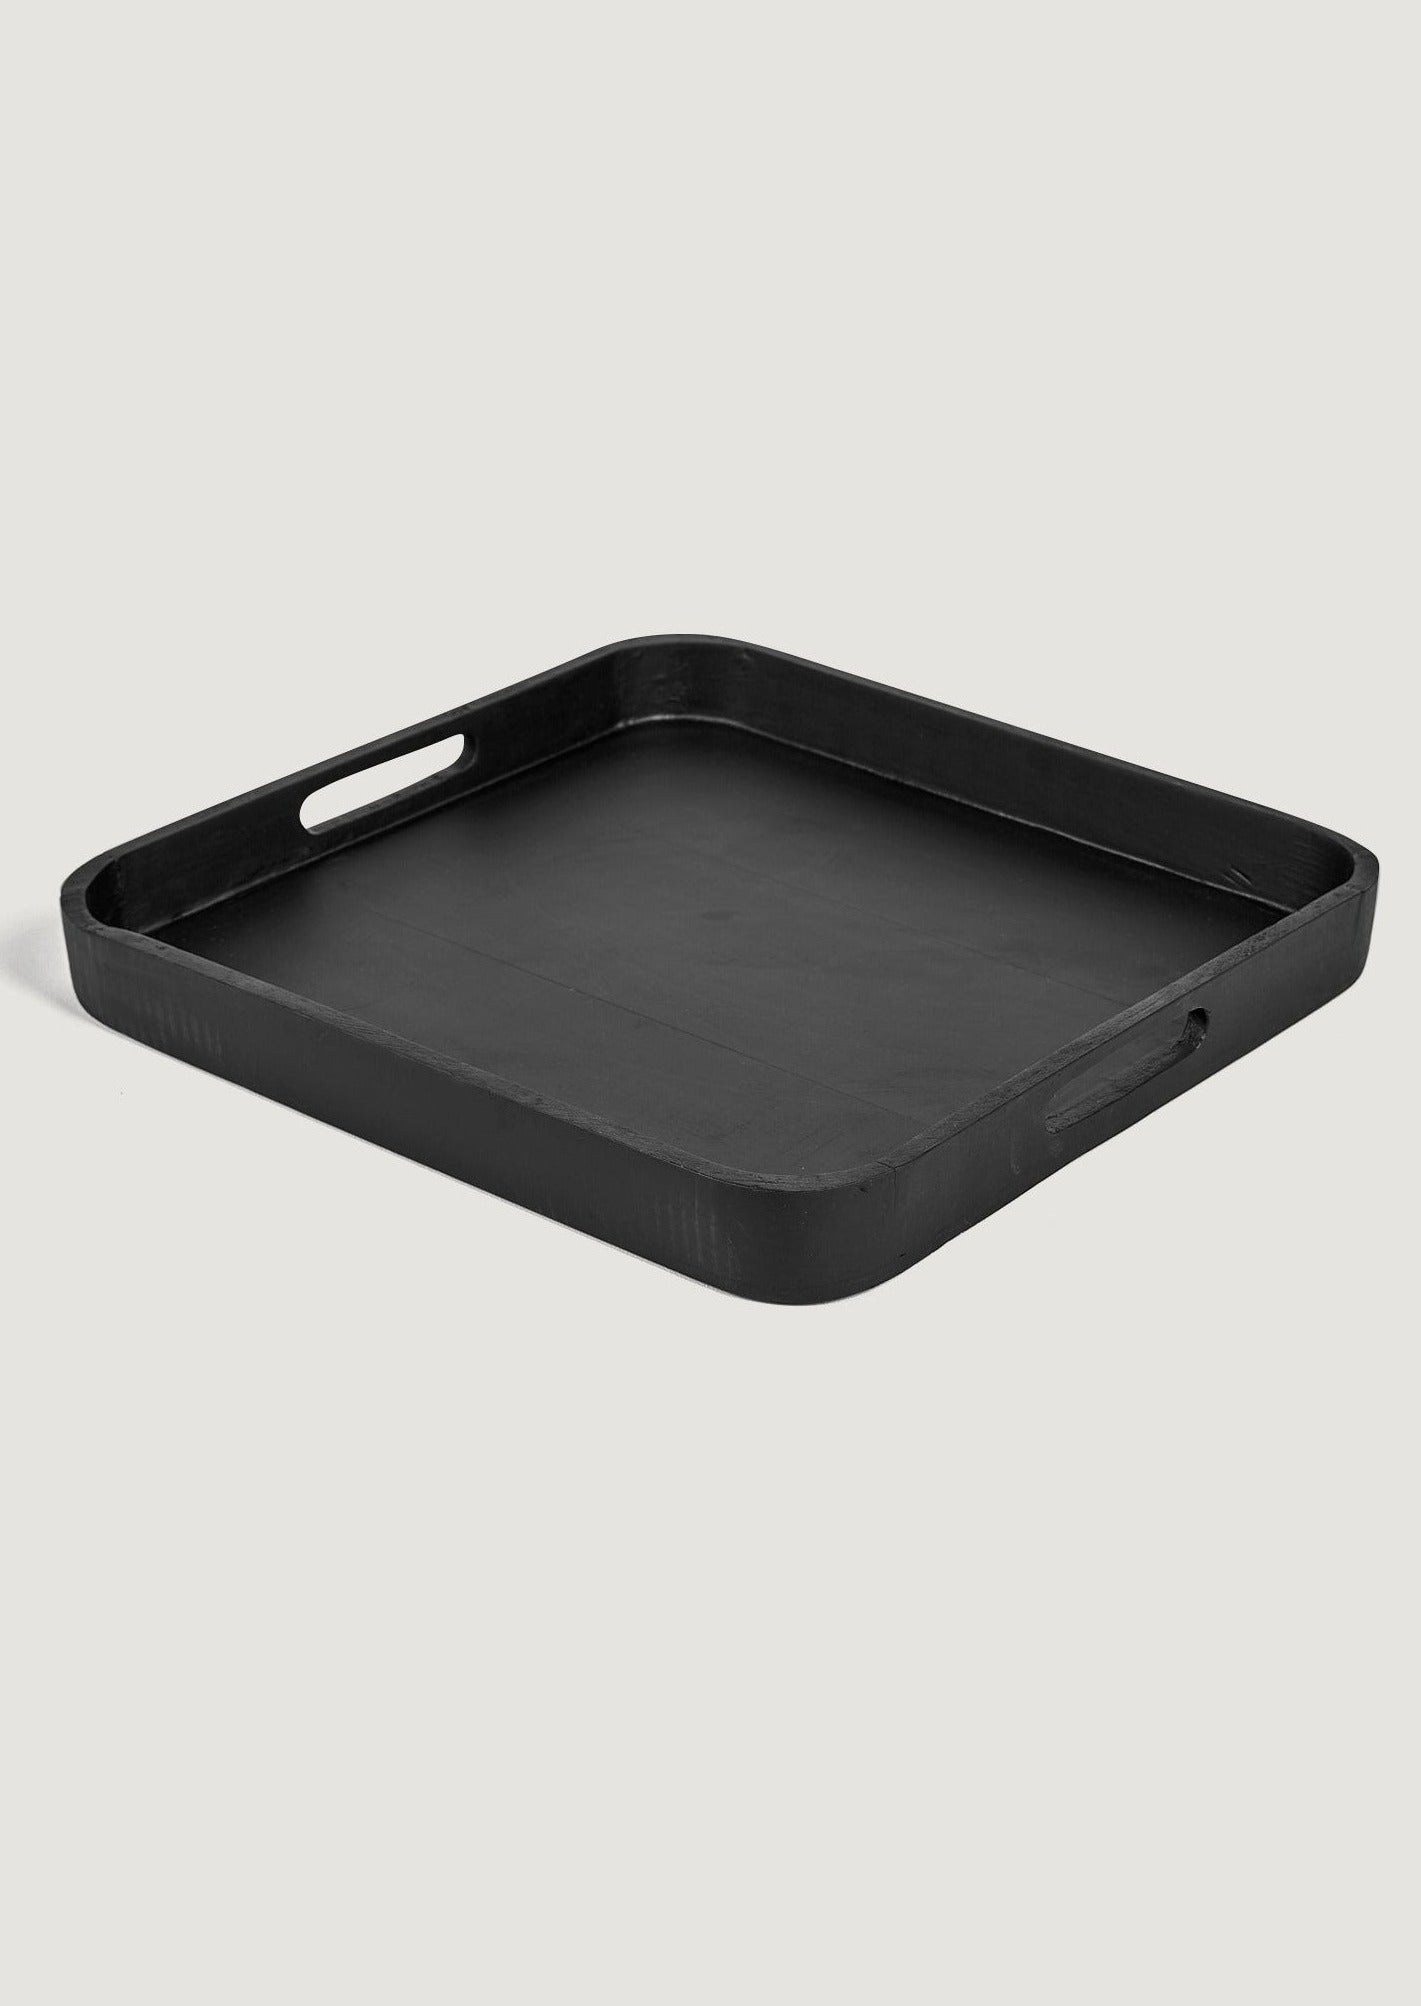 Home Decor Black Wood Square Tray with Handles at afloral